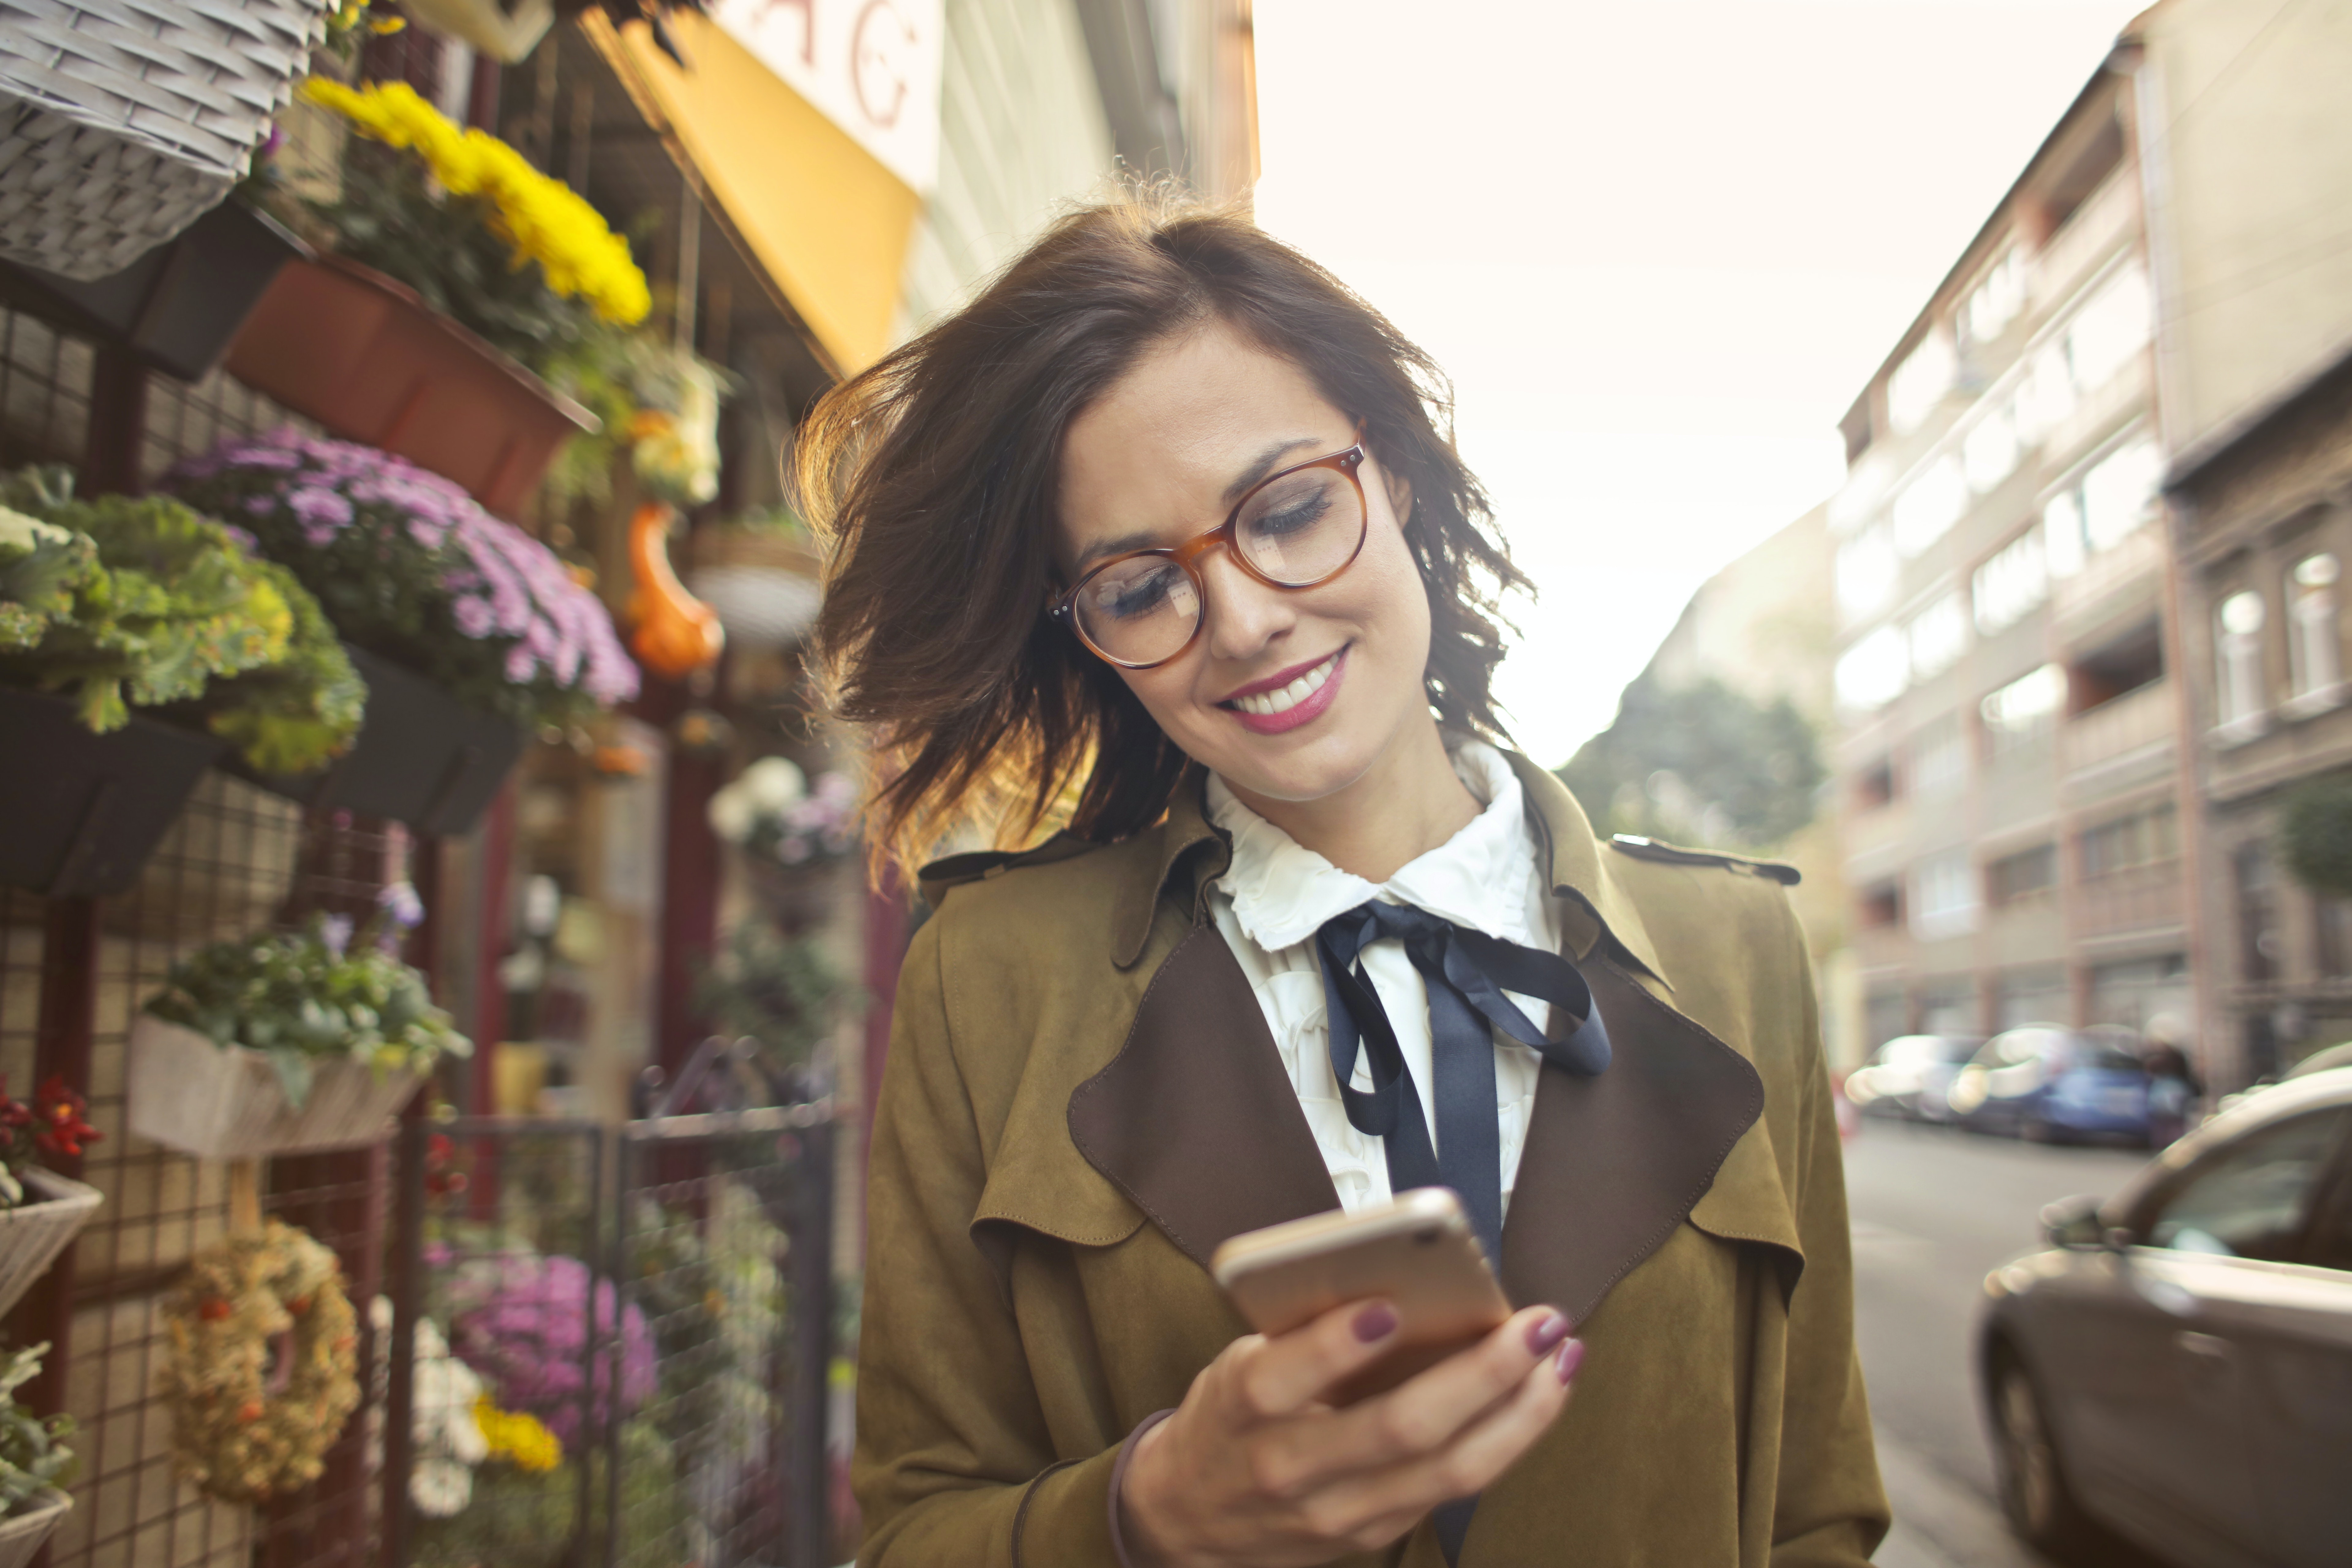 Online Shopper On Mobile Device Walking Down The Street Reading Market-Driven Media Content